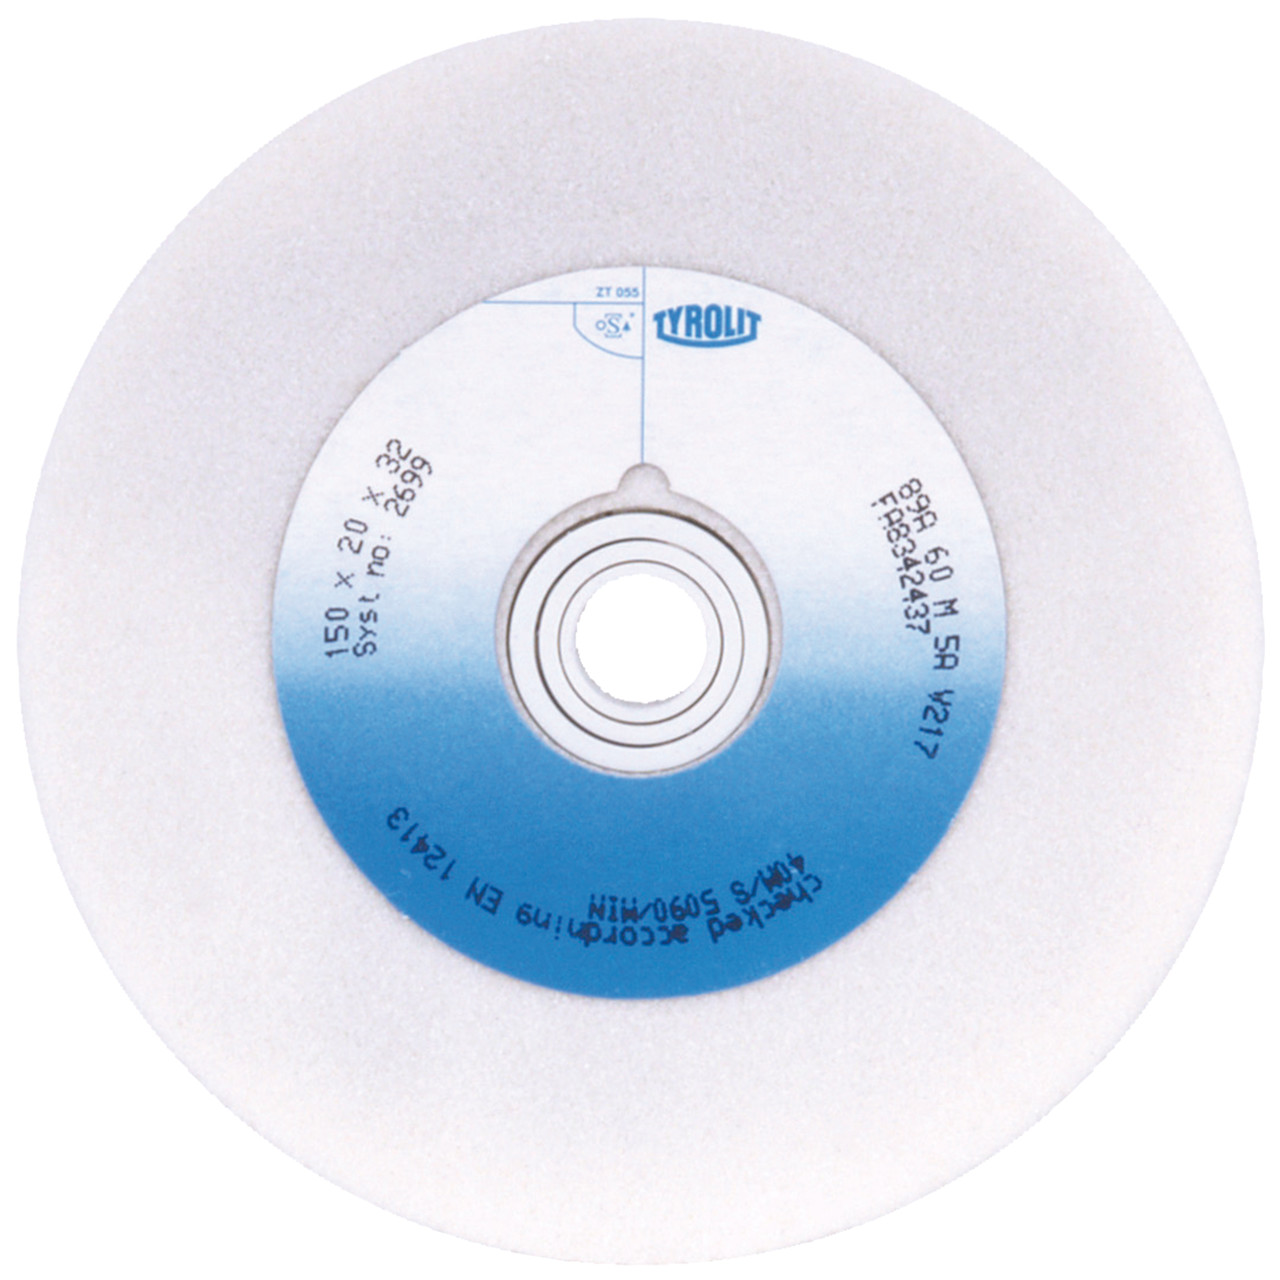 Tyrolit Conventional ceramic grinding discs DxDxH 200x25x51 For high-alloy steels and HSS, shape: 1, Art. 534539